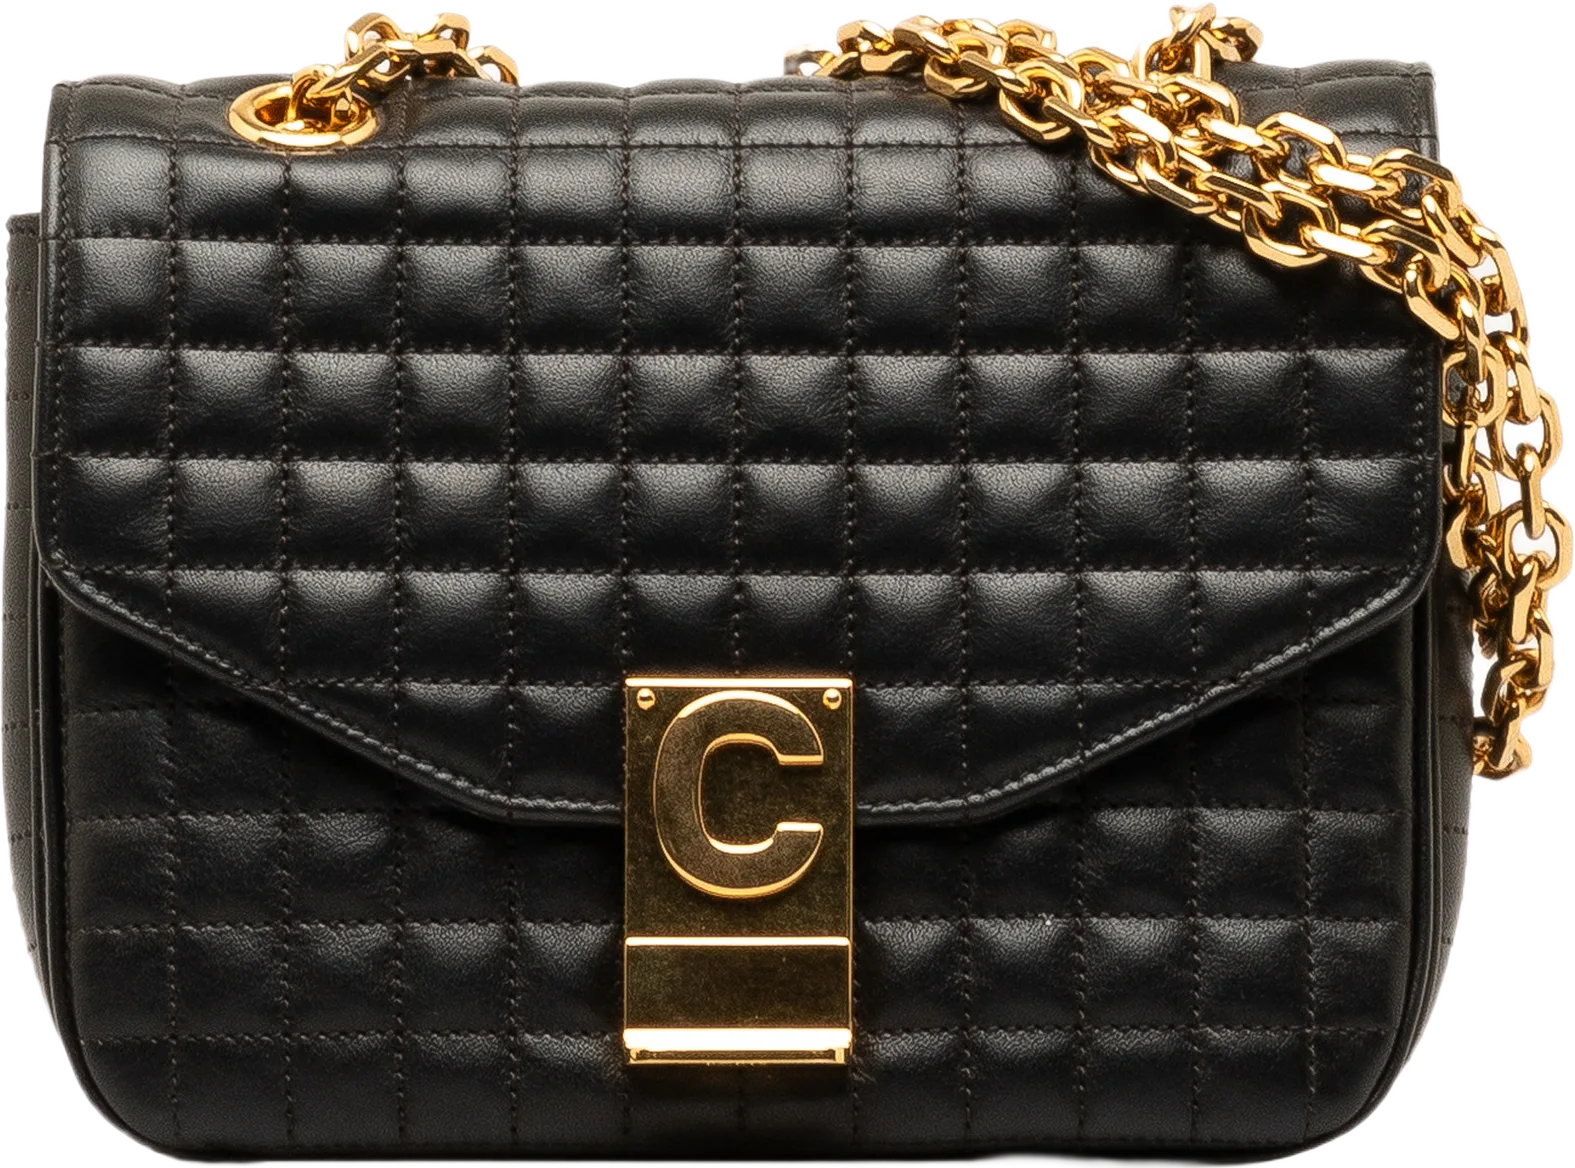 Celine Small Quilted Calfskin C Bag